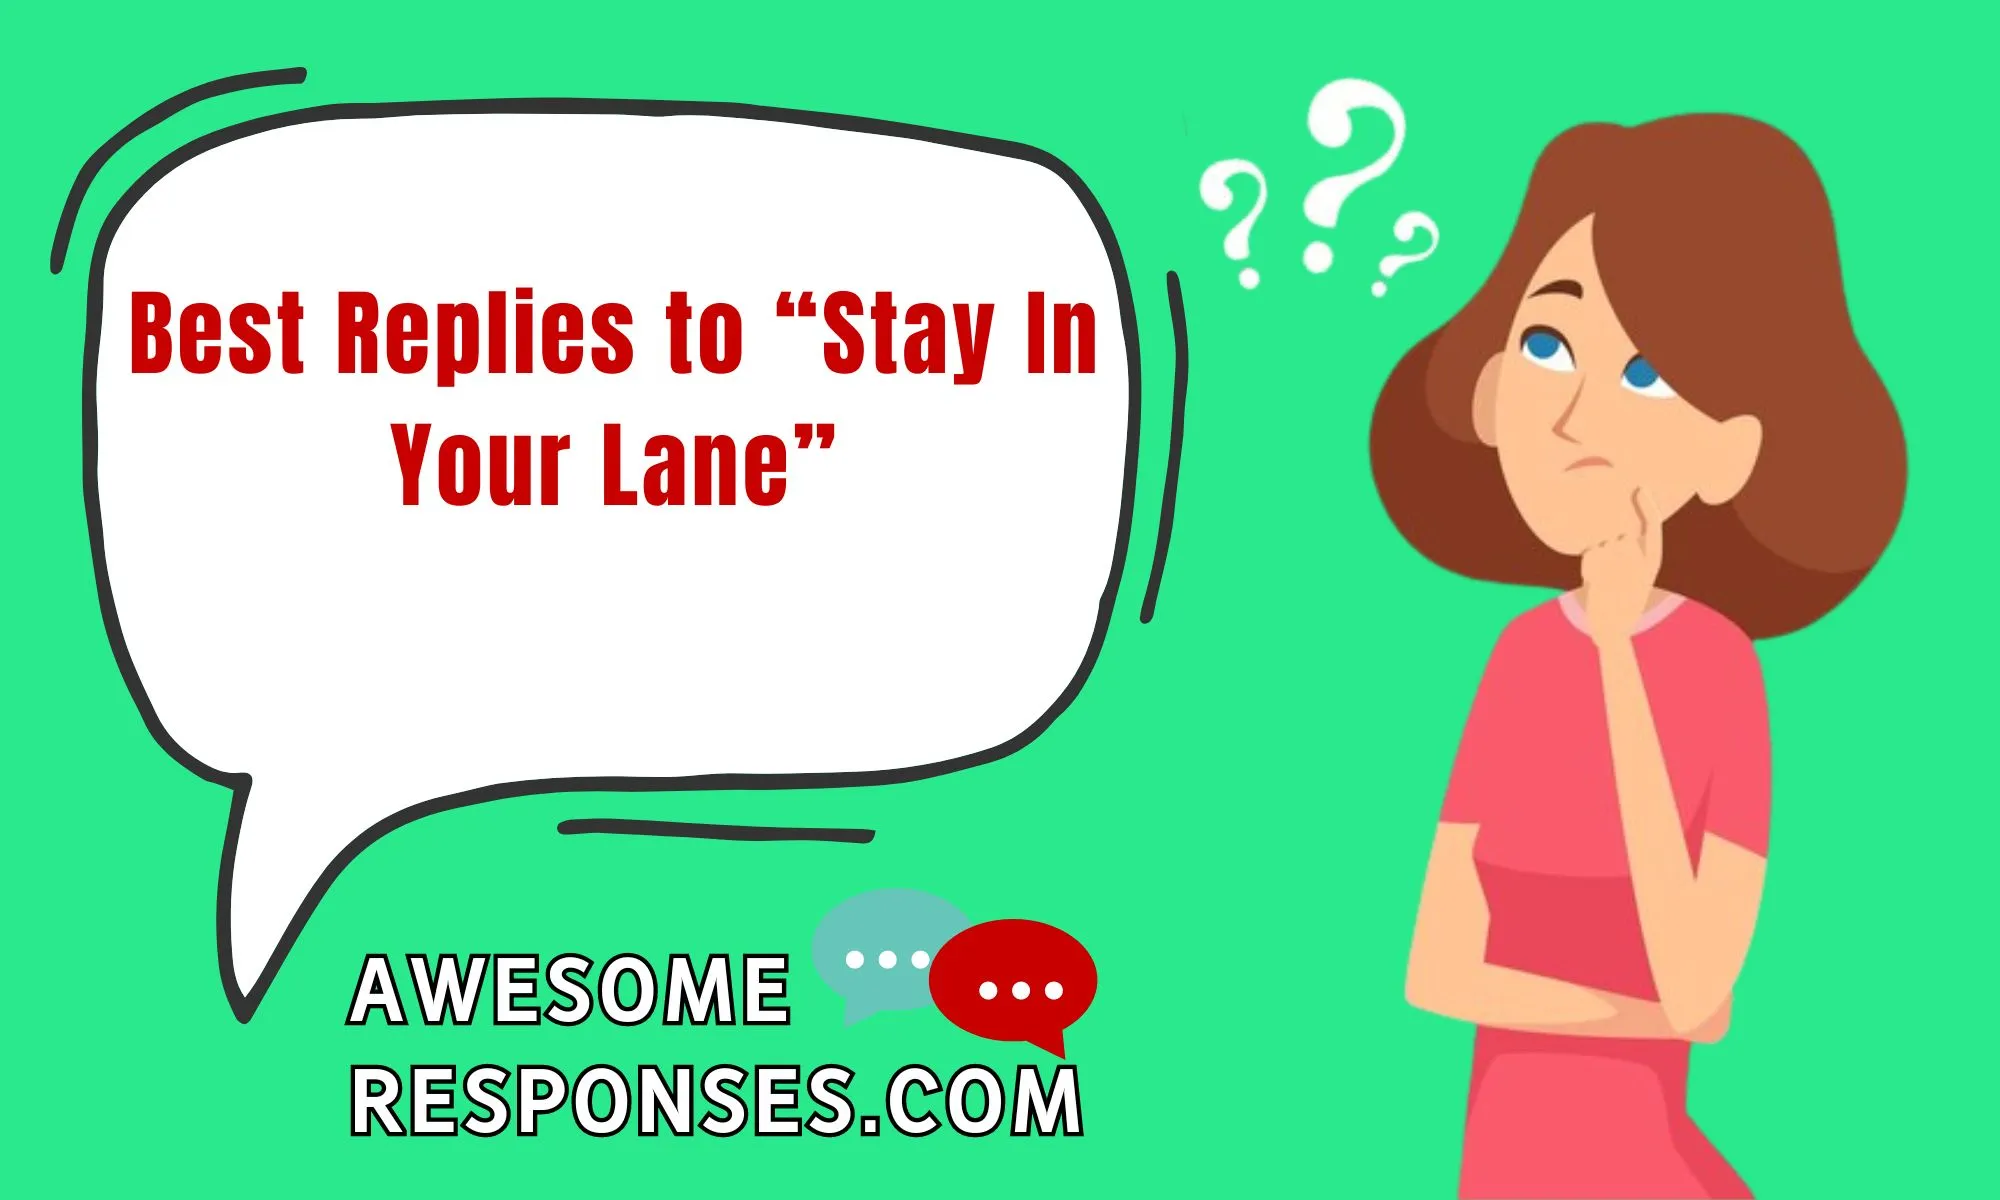 Best Replies to “Stay In Your Lane”